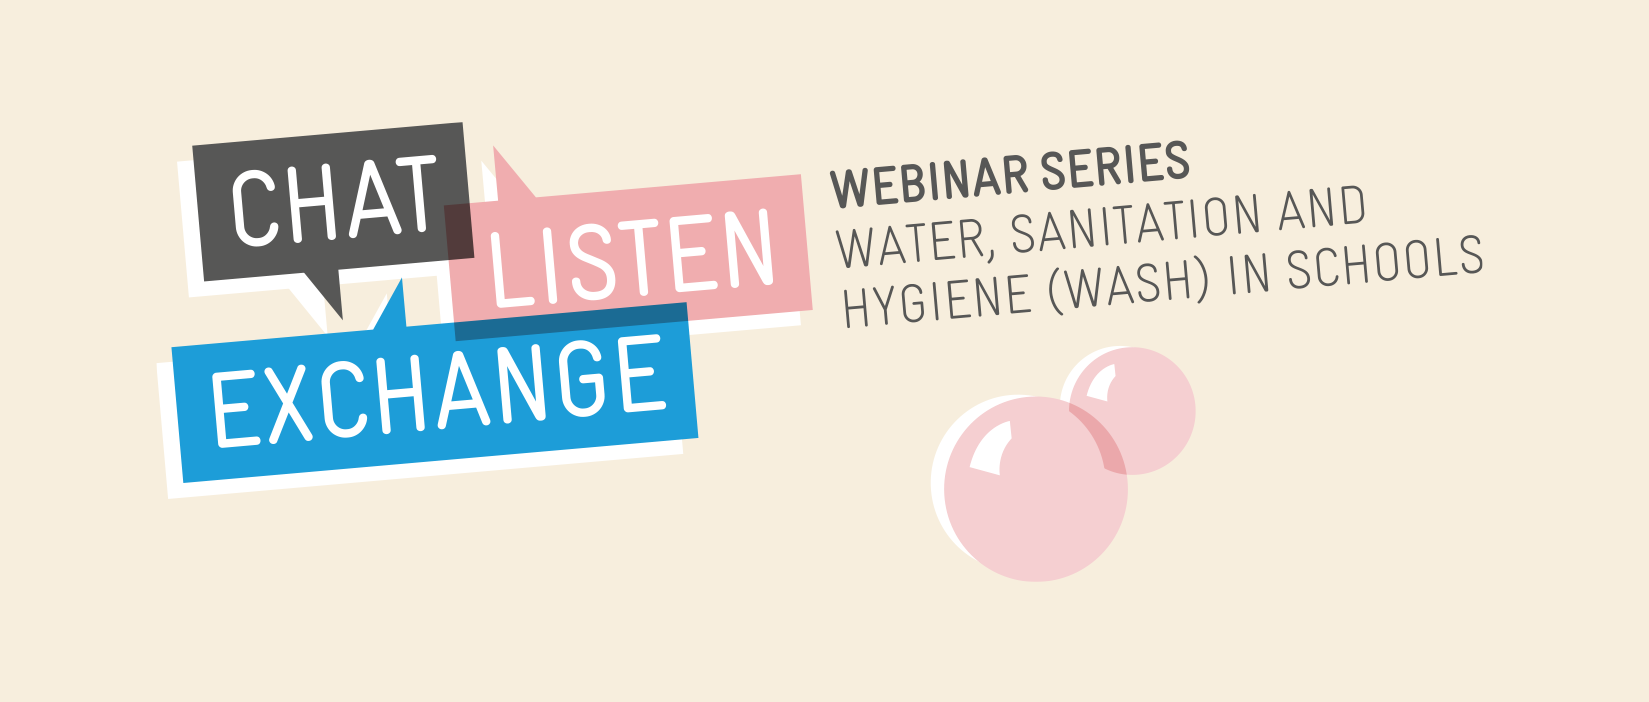 Chat, Listen, Exchange: Second Menstrual Health and Hygiene Online learning exchange